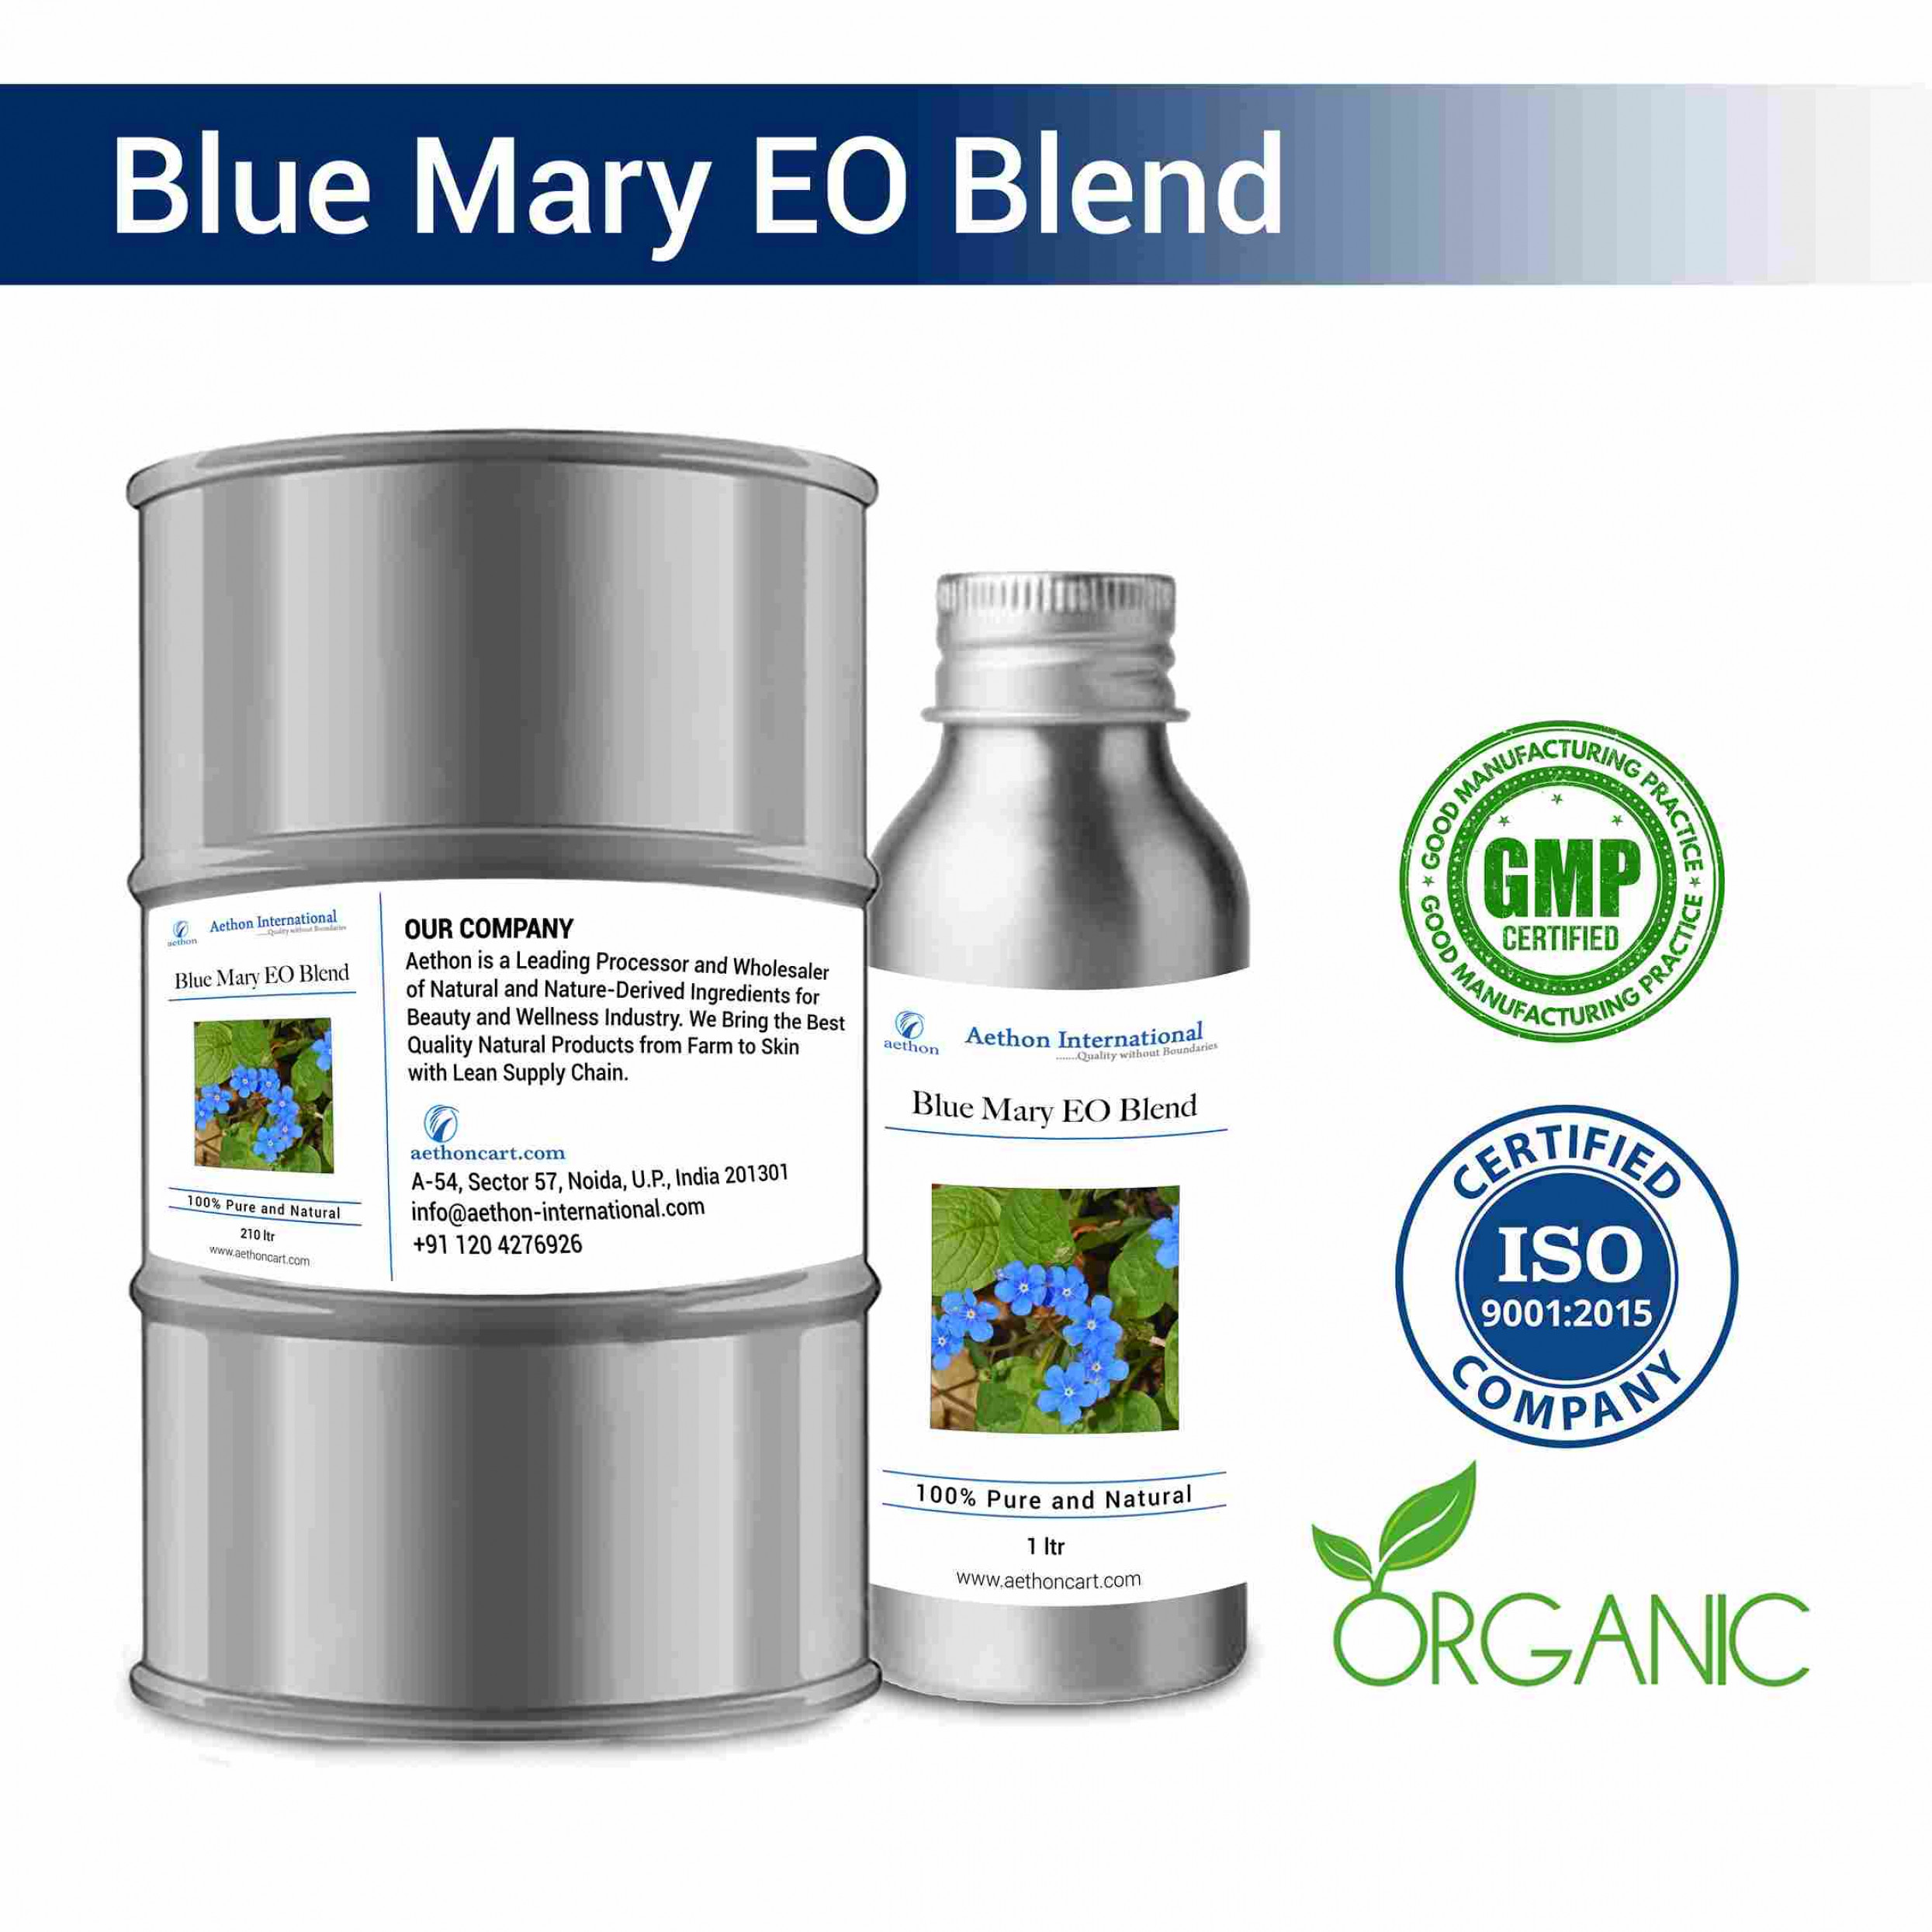 Blue Mary EO Blend